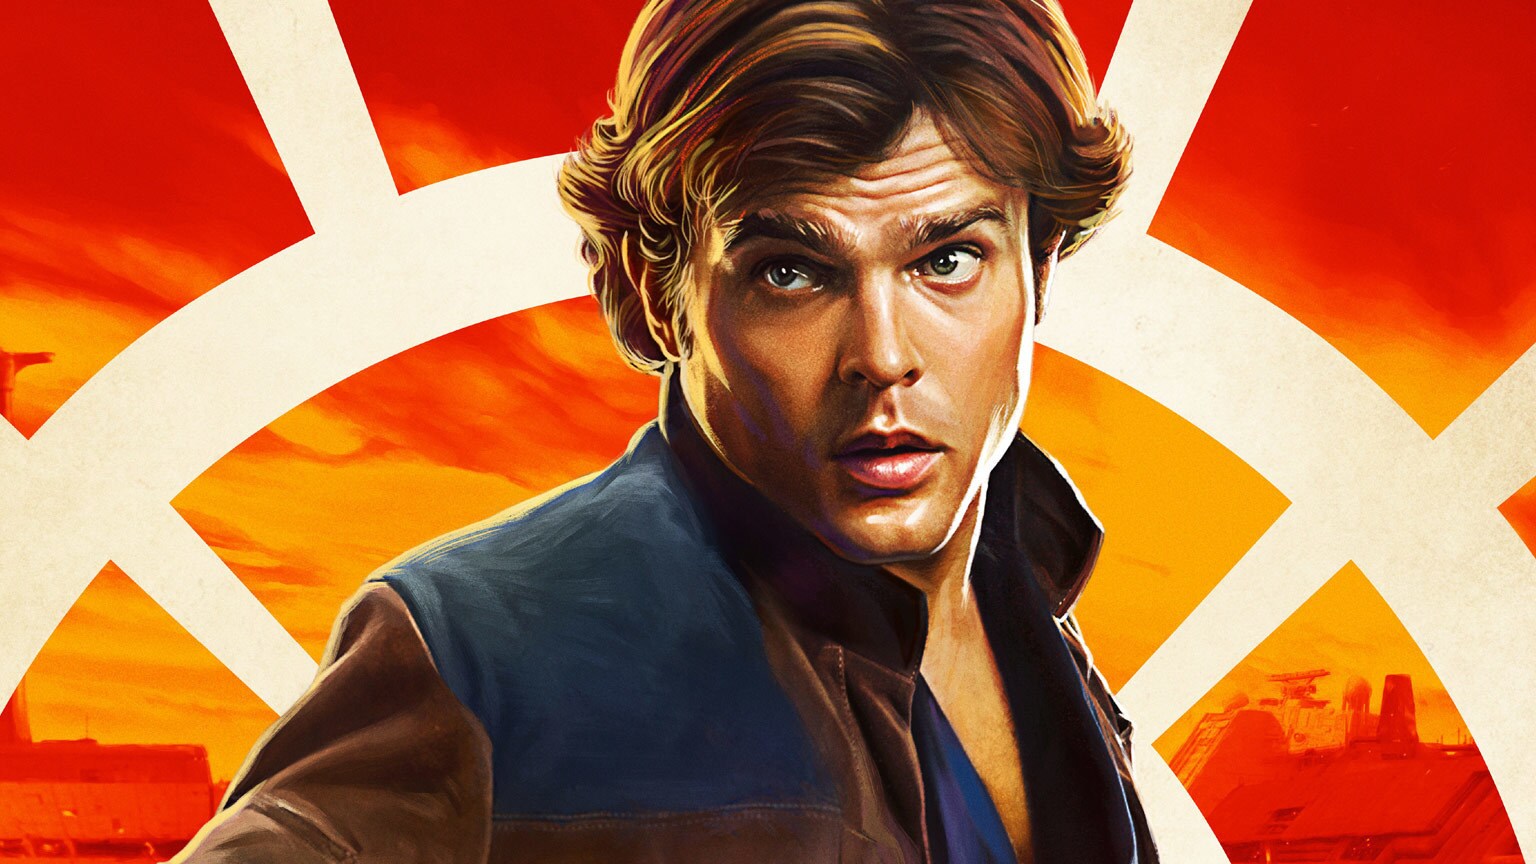 Meet the Crew in These New Solo: A Star Wars Story Character Posters